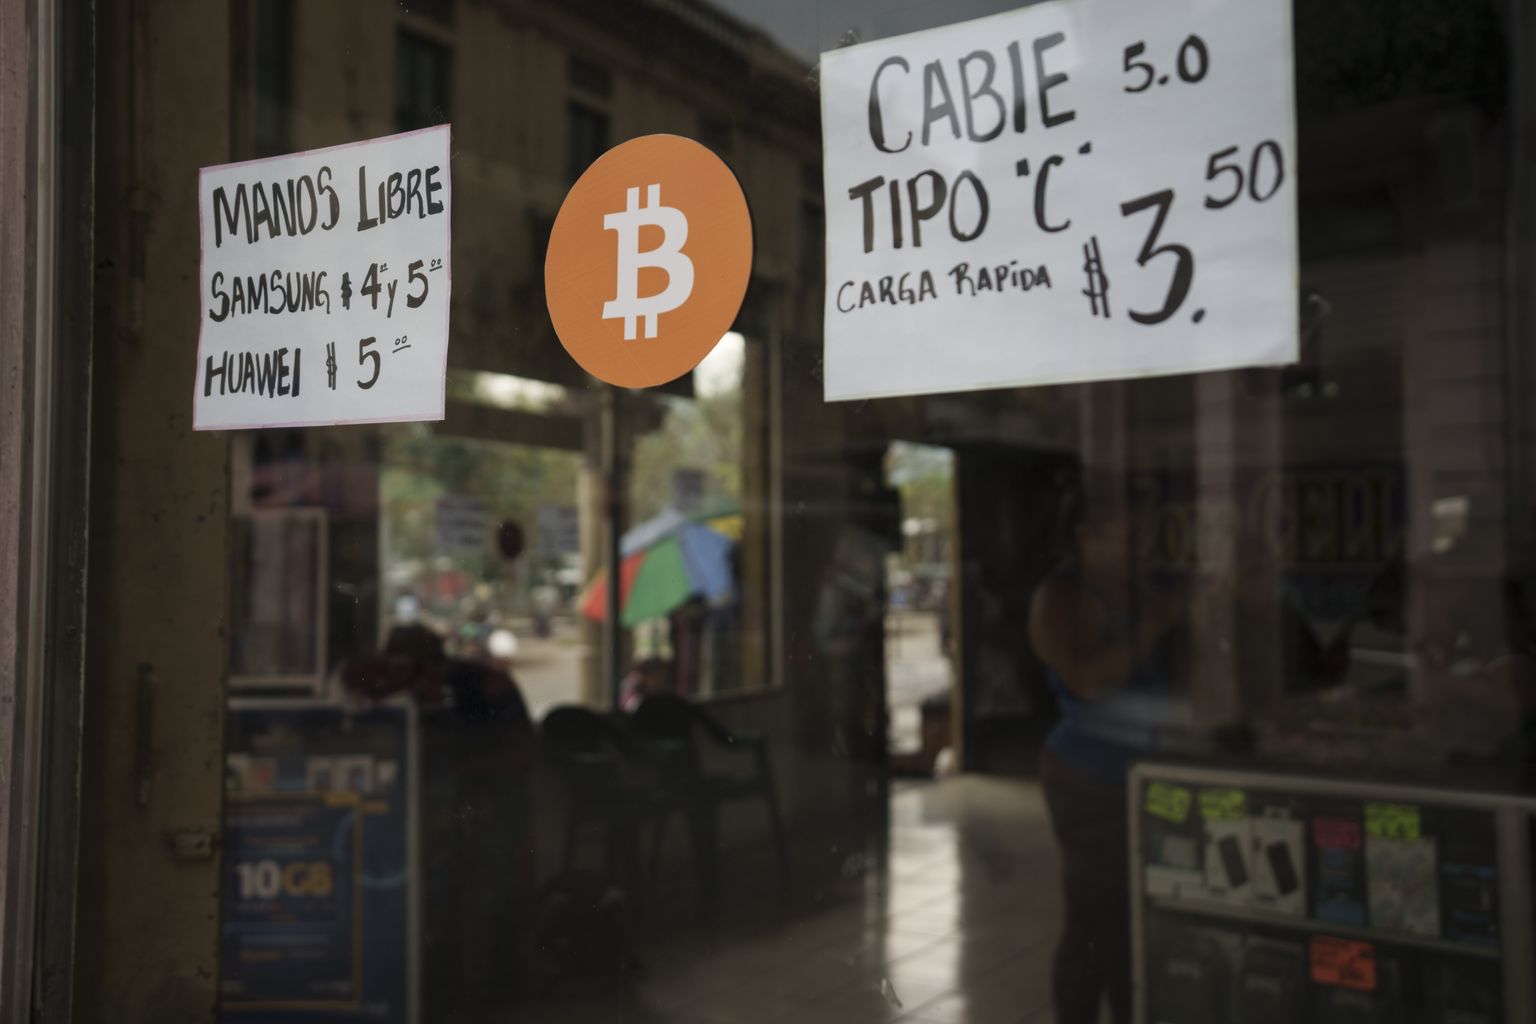 A Bitcoin sign is displayed at a cell phone store in San Salvador, El Salvador, Wednesday, Feb. 2, 2022. The government of El Salvador on Monday rejected a recommendation by the International Monetary Fund to drop Bitcoin as legal tender in the Central American country. (AP Photo/Moises Castillo)